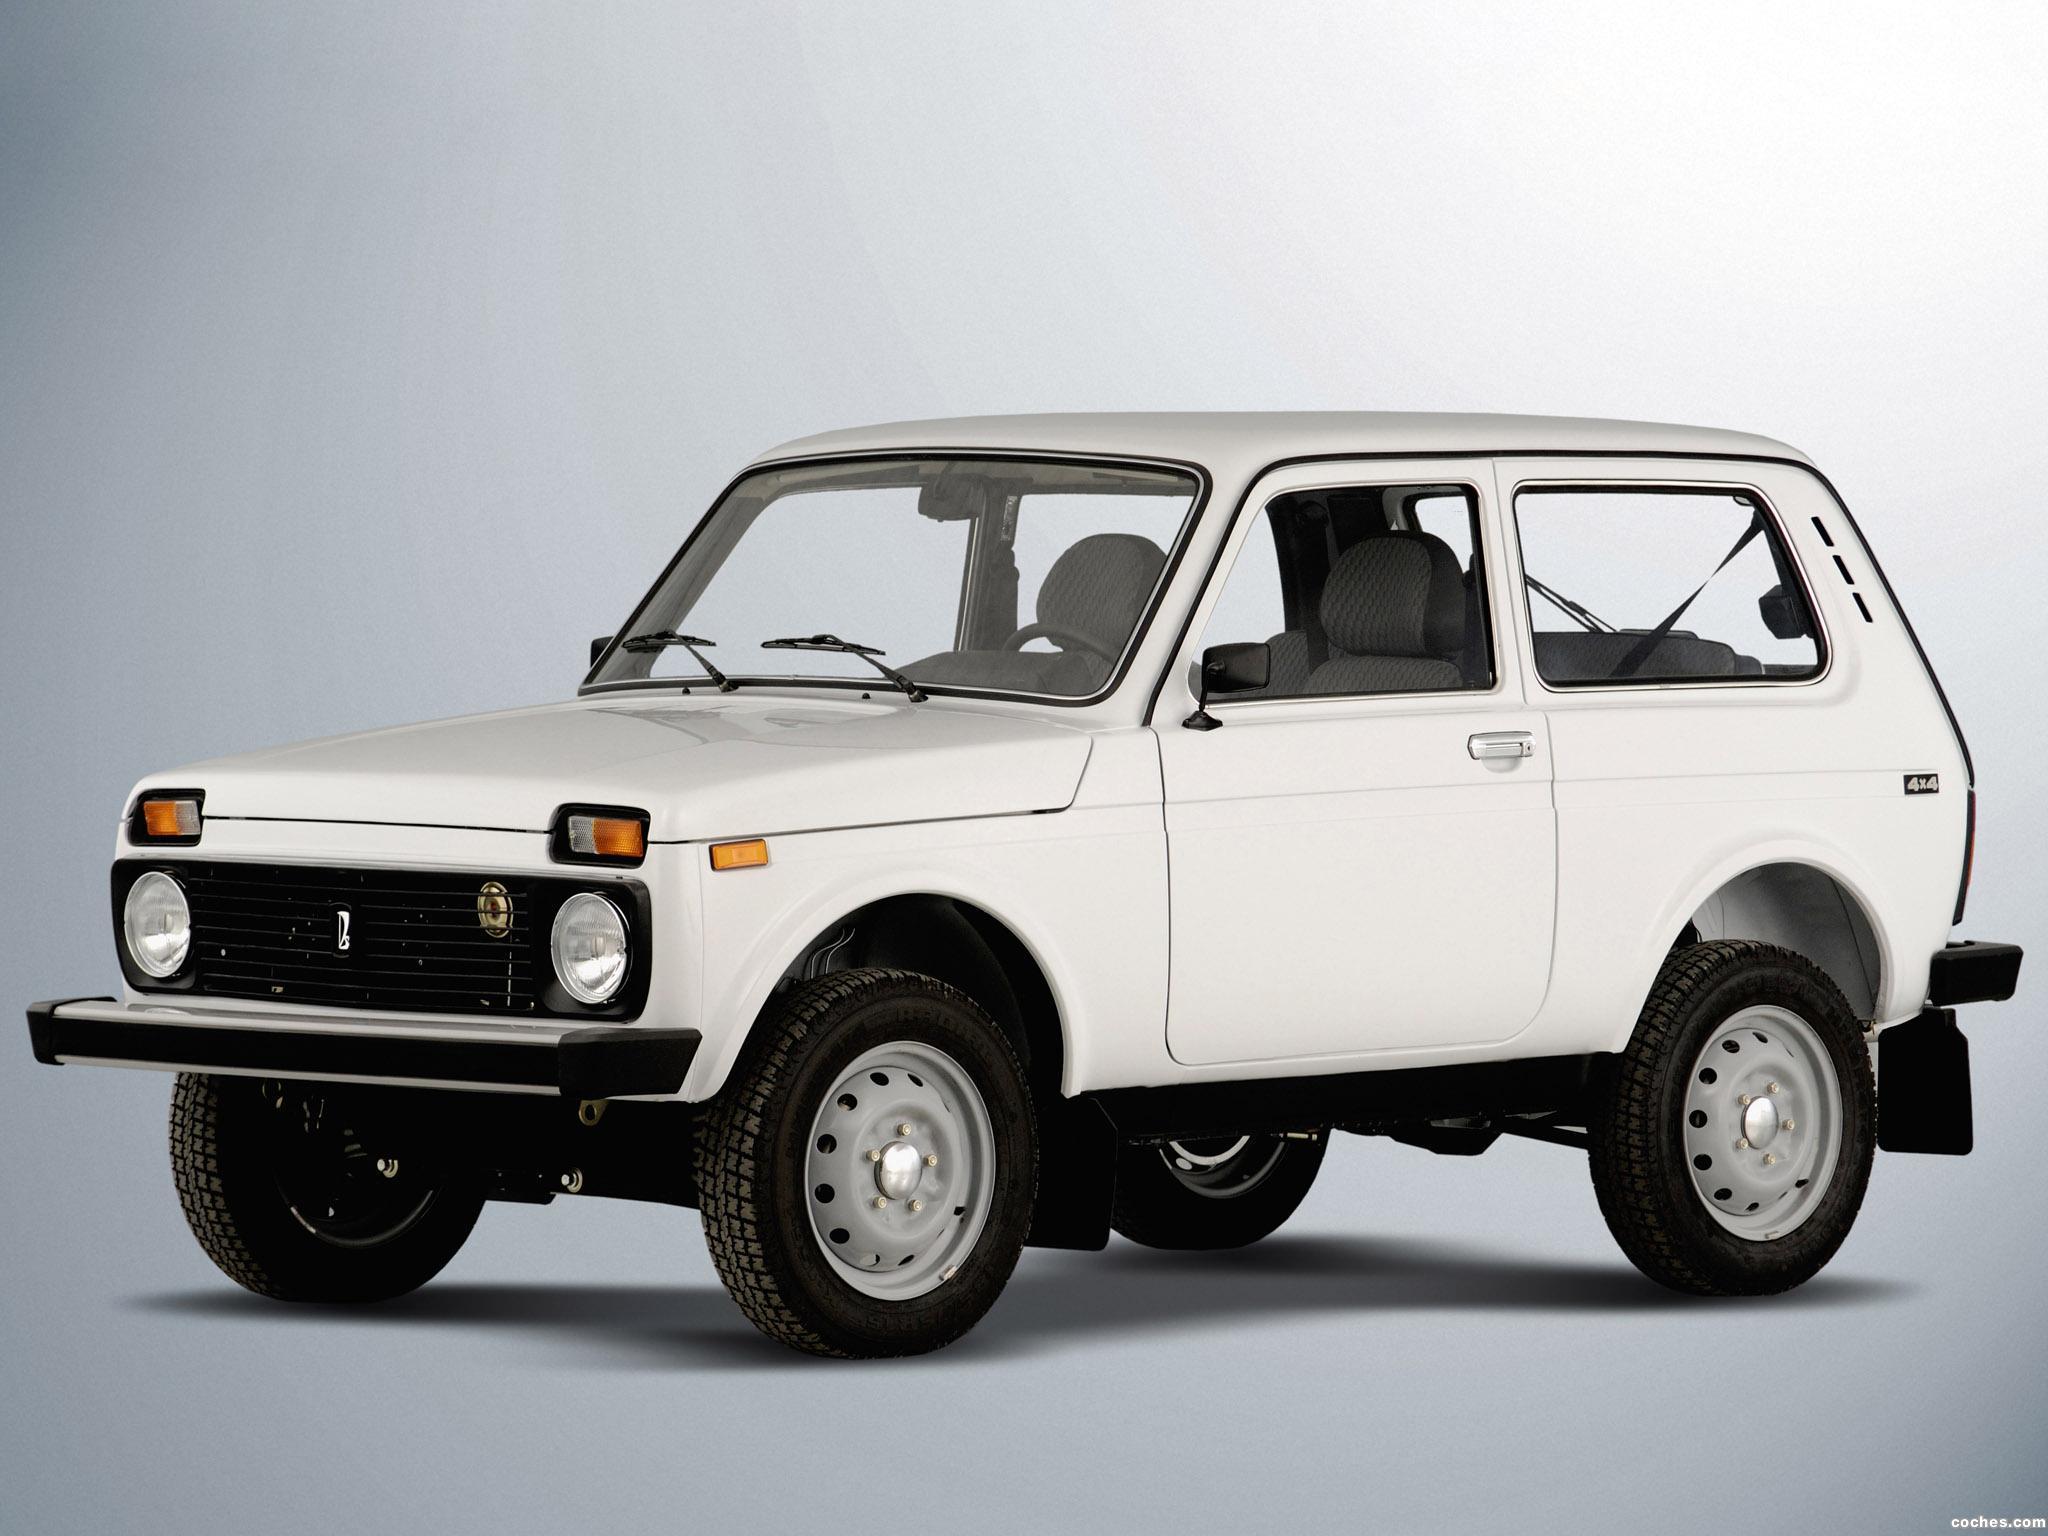 dayz-lada-niva-is-going-to-be-added-in-dayz1.jpg